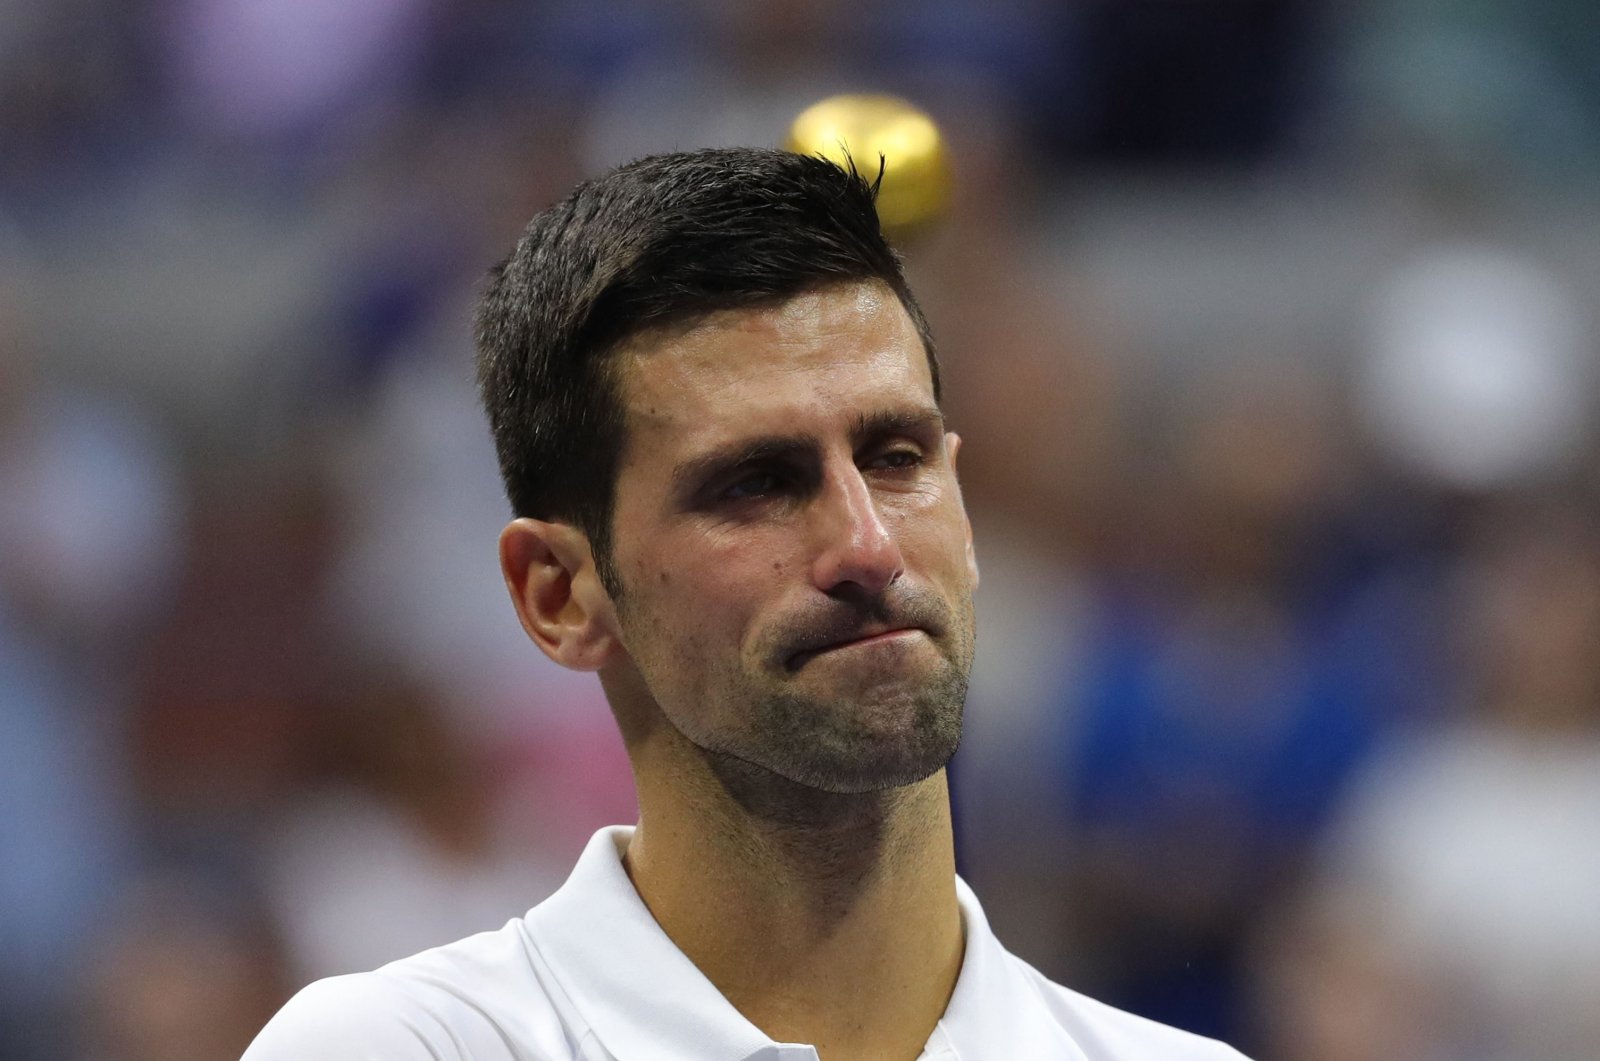 In this file photograph taken on Sept. 13, 2021, Serbia&#039;s Novak Djokovic gestures to the crowd after defeat against Russia&#039;s Daniil Medvedev after their 2021 U.S. Open Tennis tournament men&#039;s final match at the USTA Billie Jean King National Tennis Center in New York. (AFP File Photo)